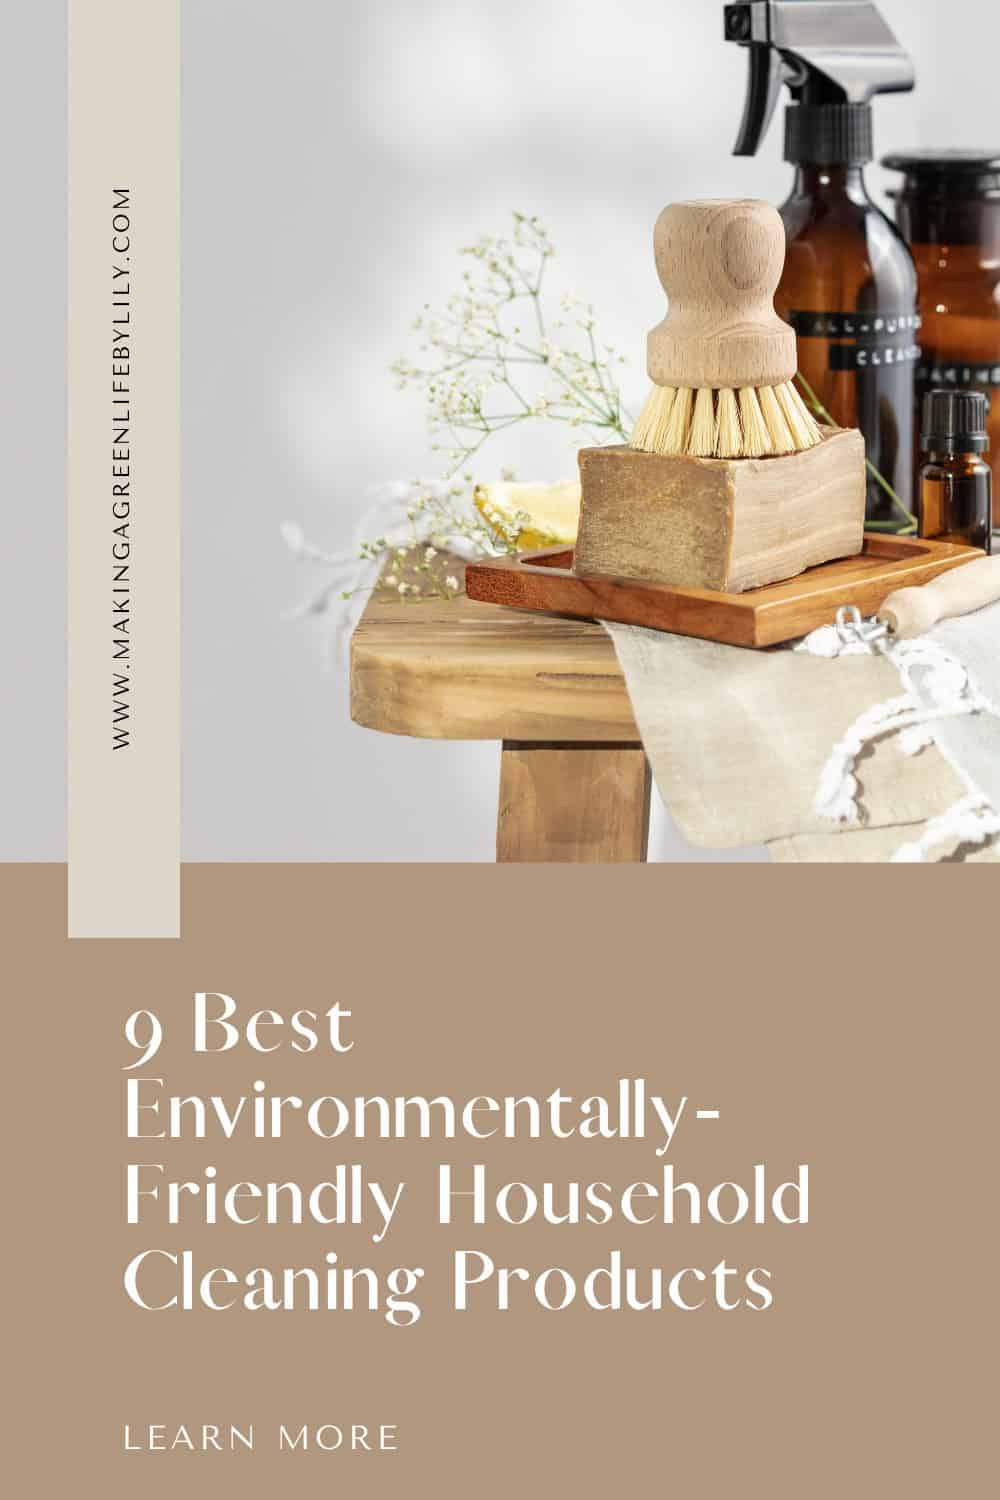 9 Best Environmentally-Friendly Household Cleaning Products